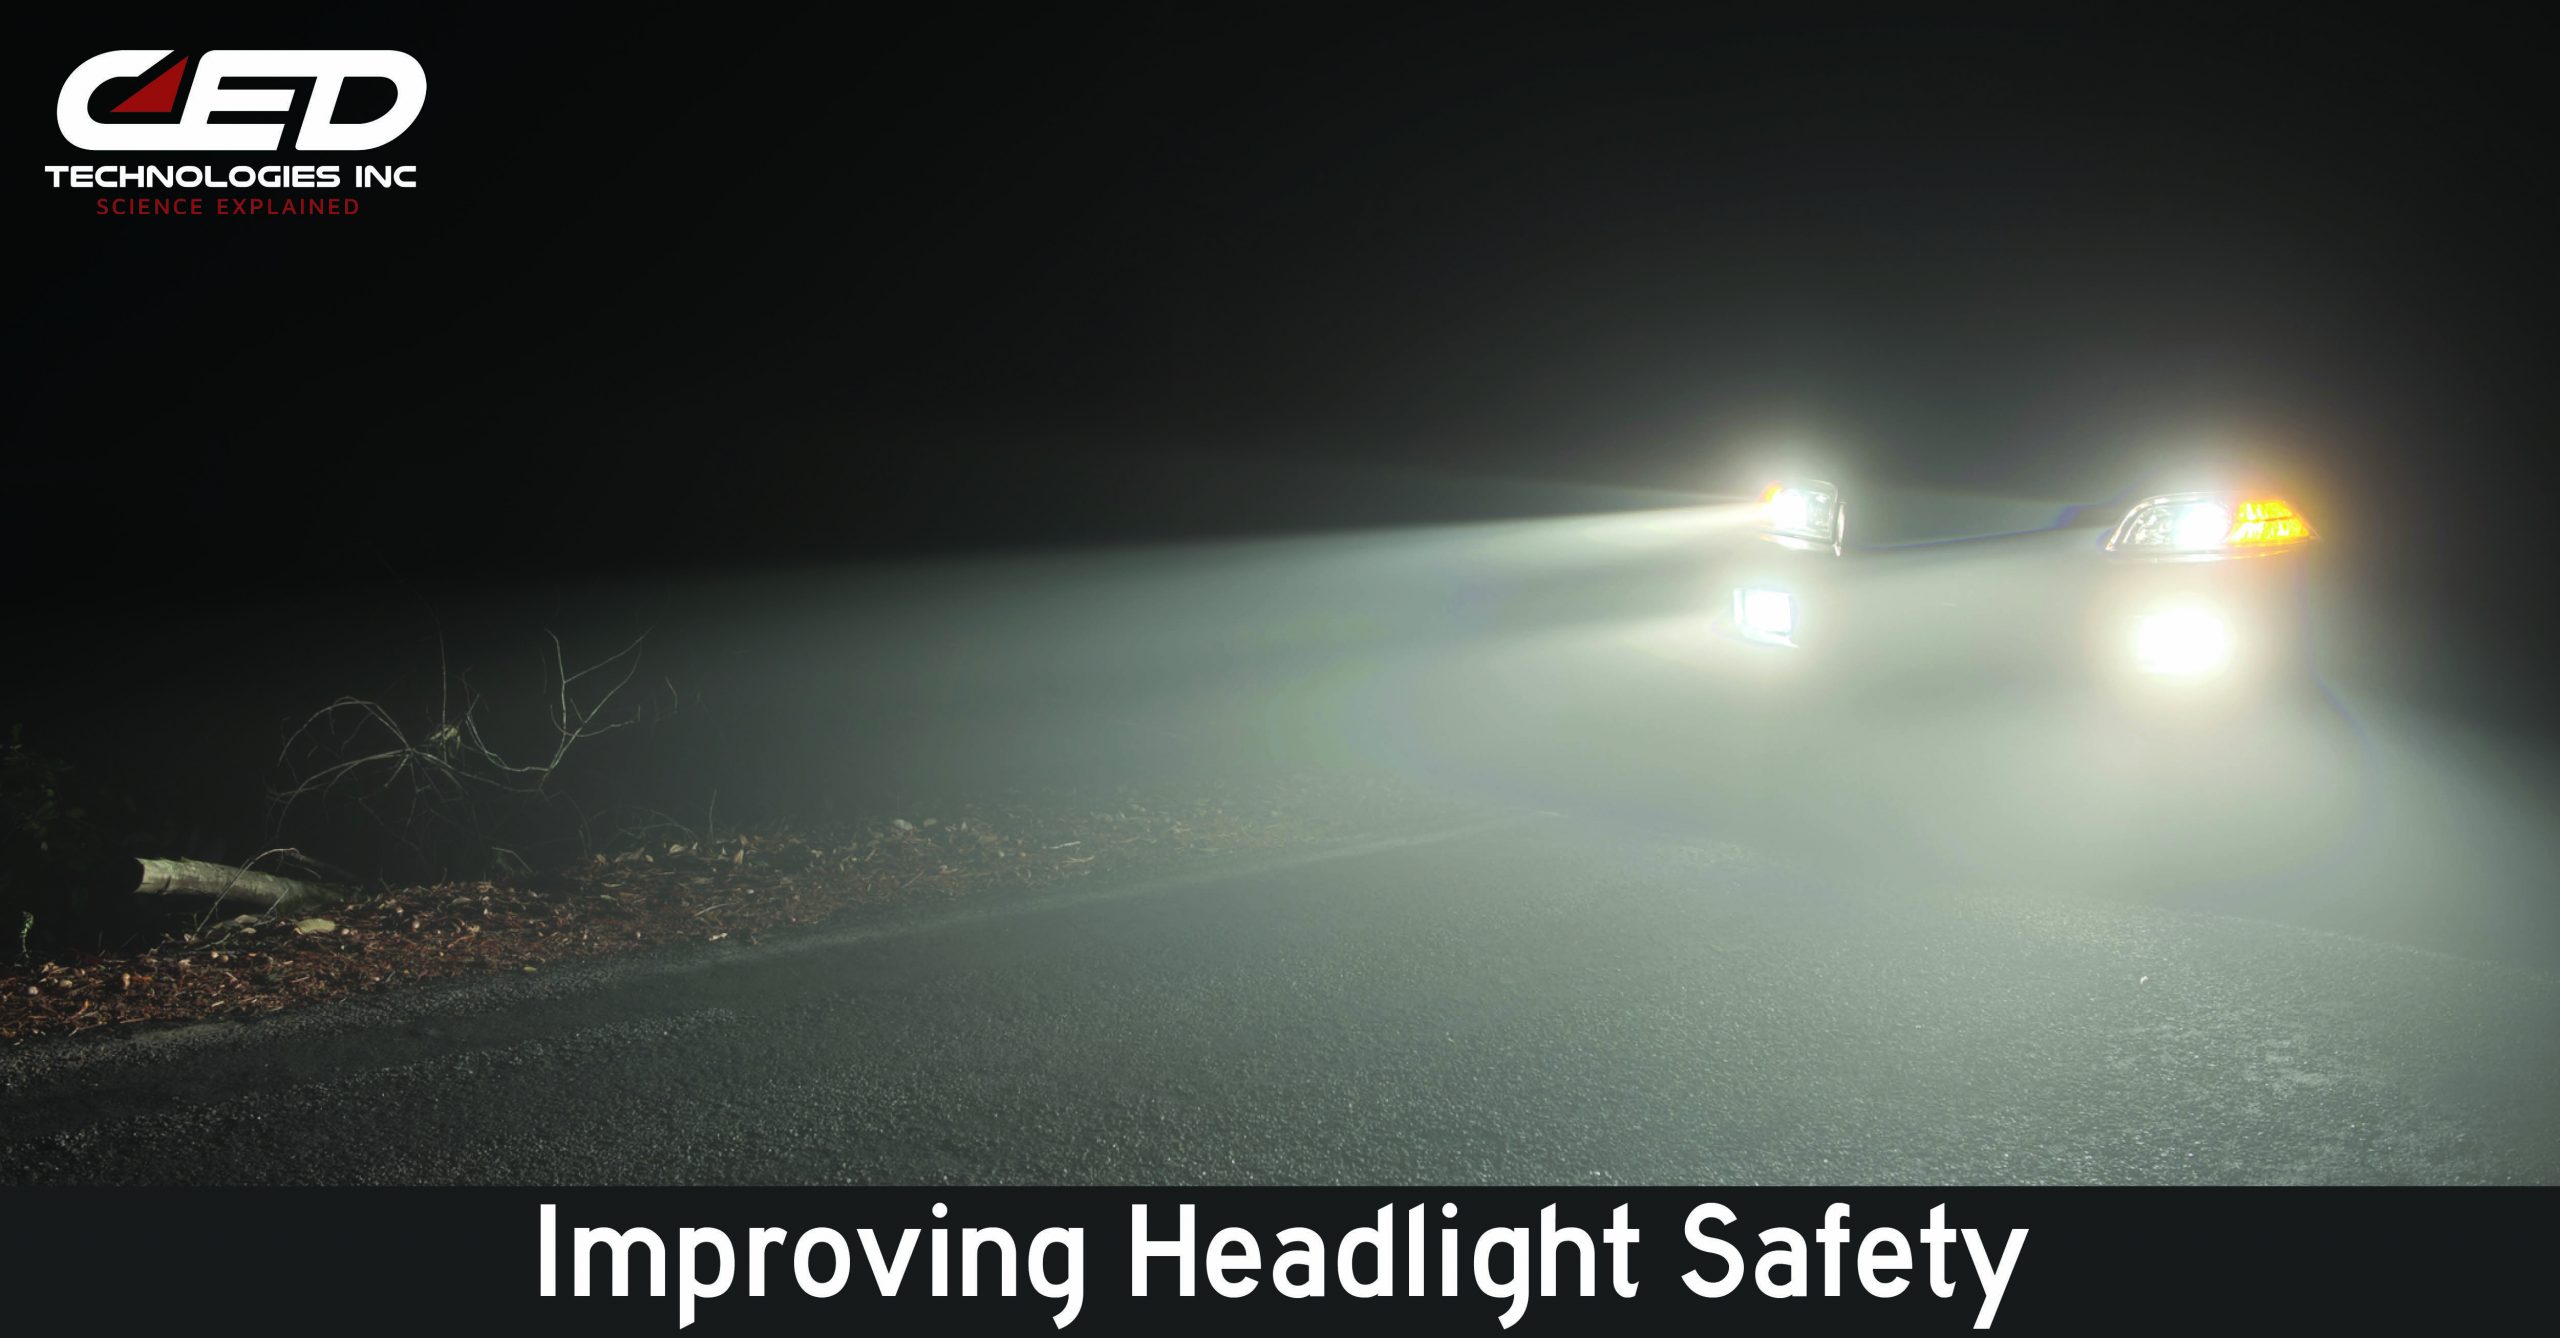 The Drive to Improve Headlight Safety